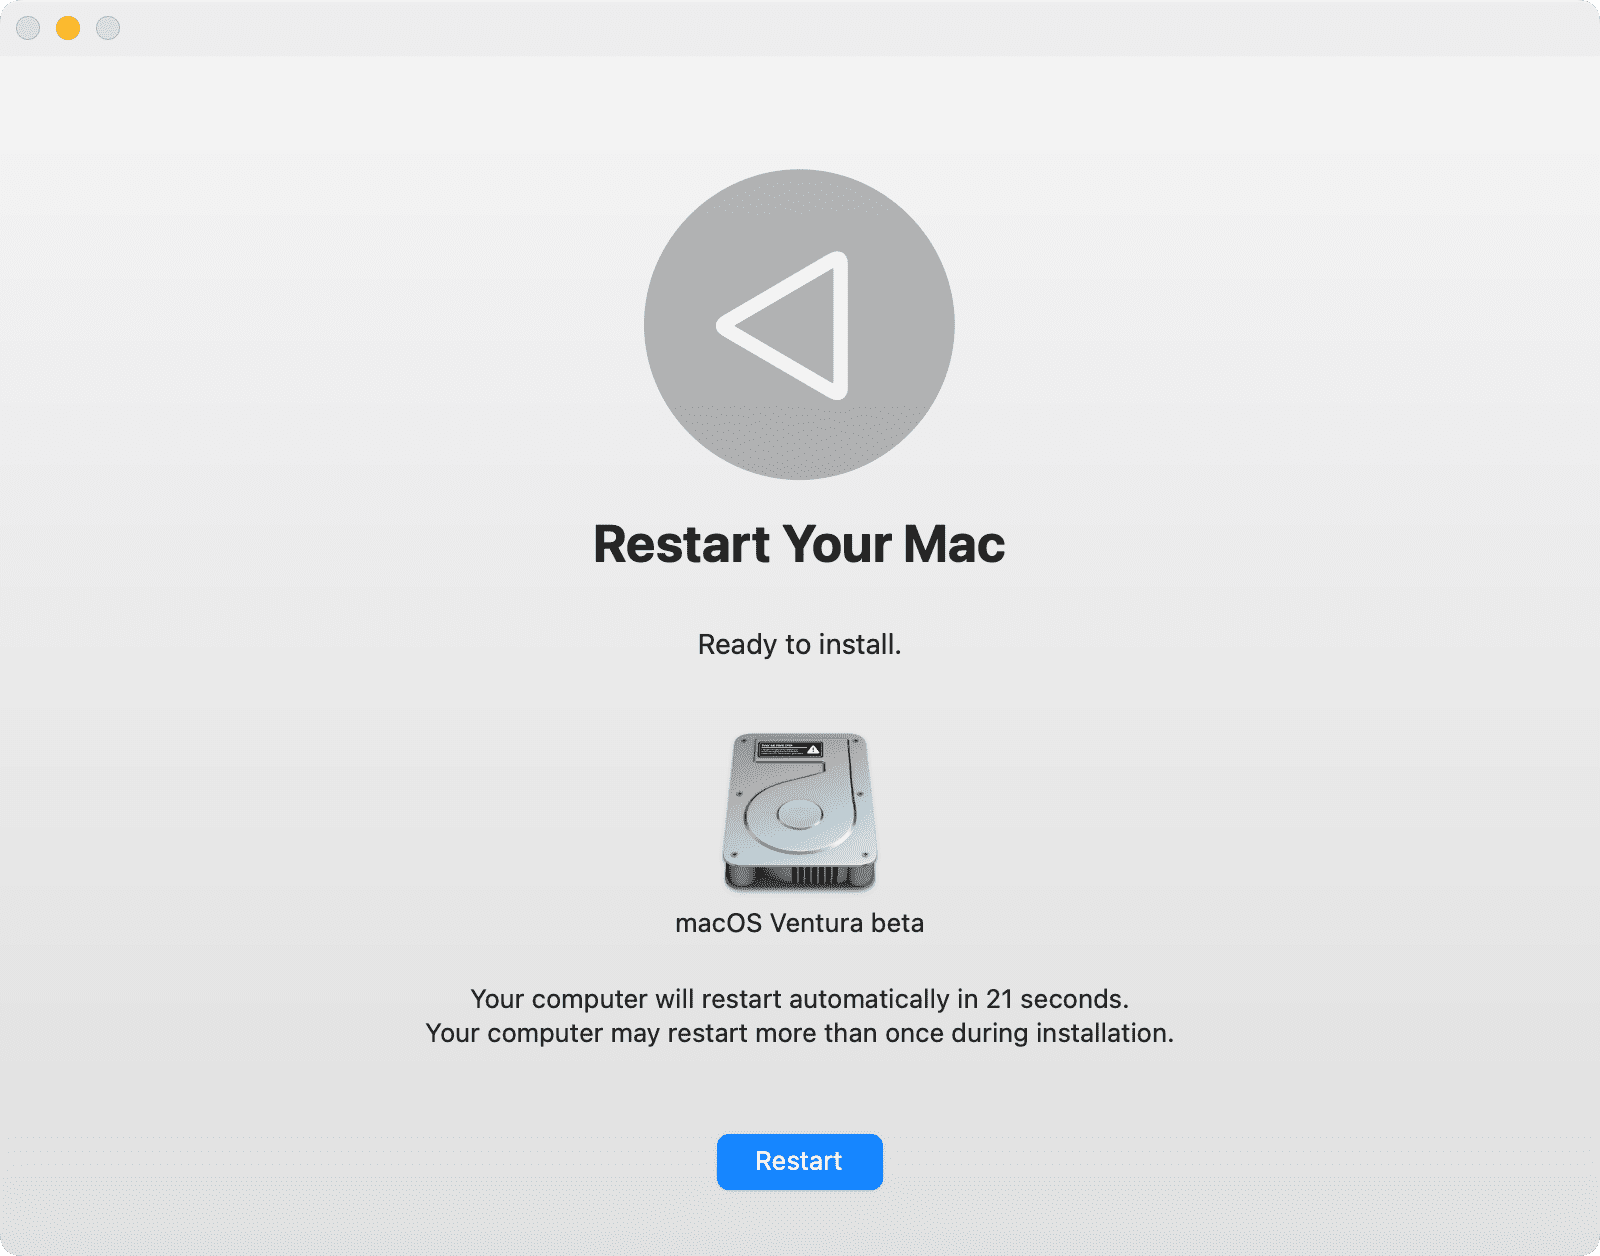 Restart your Mac to complete macOS 13 installation